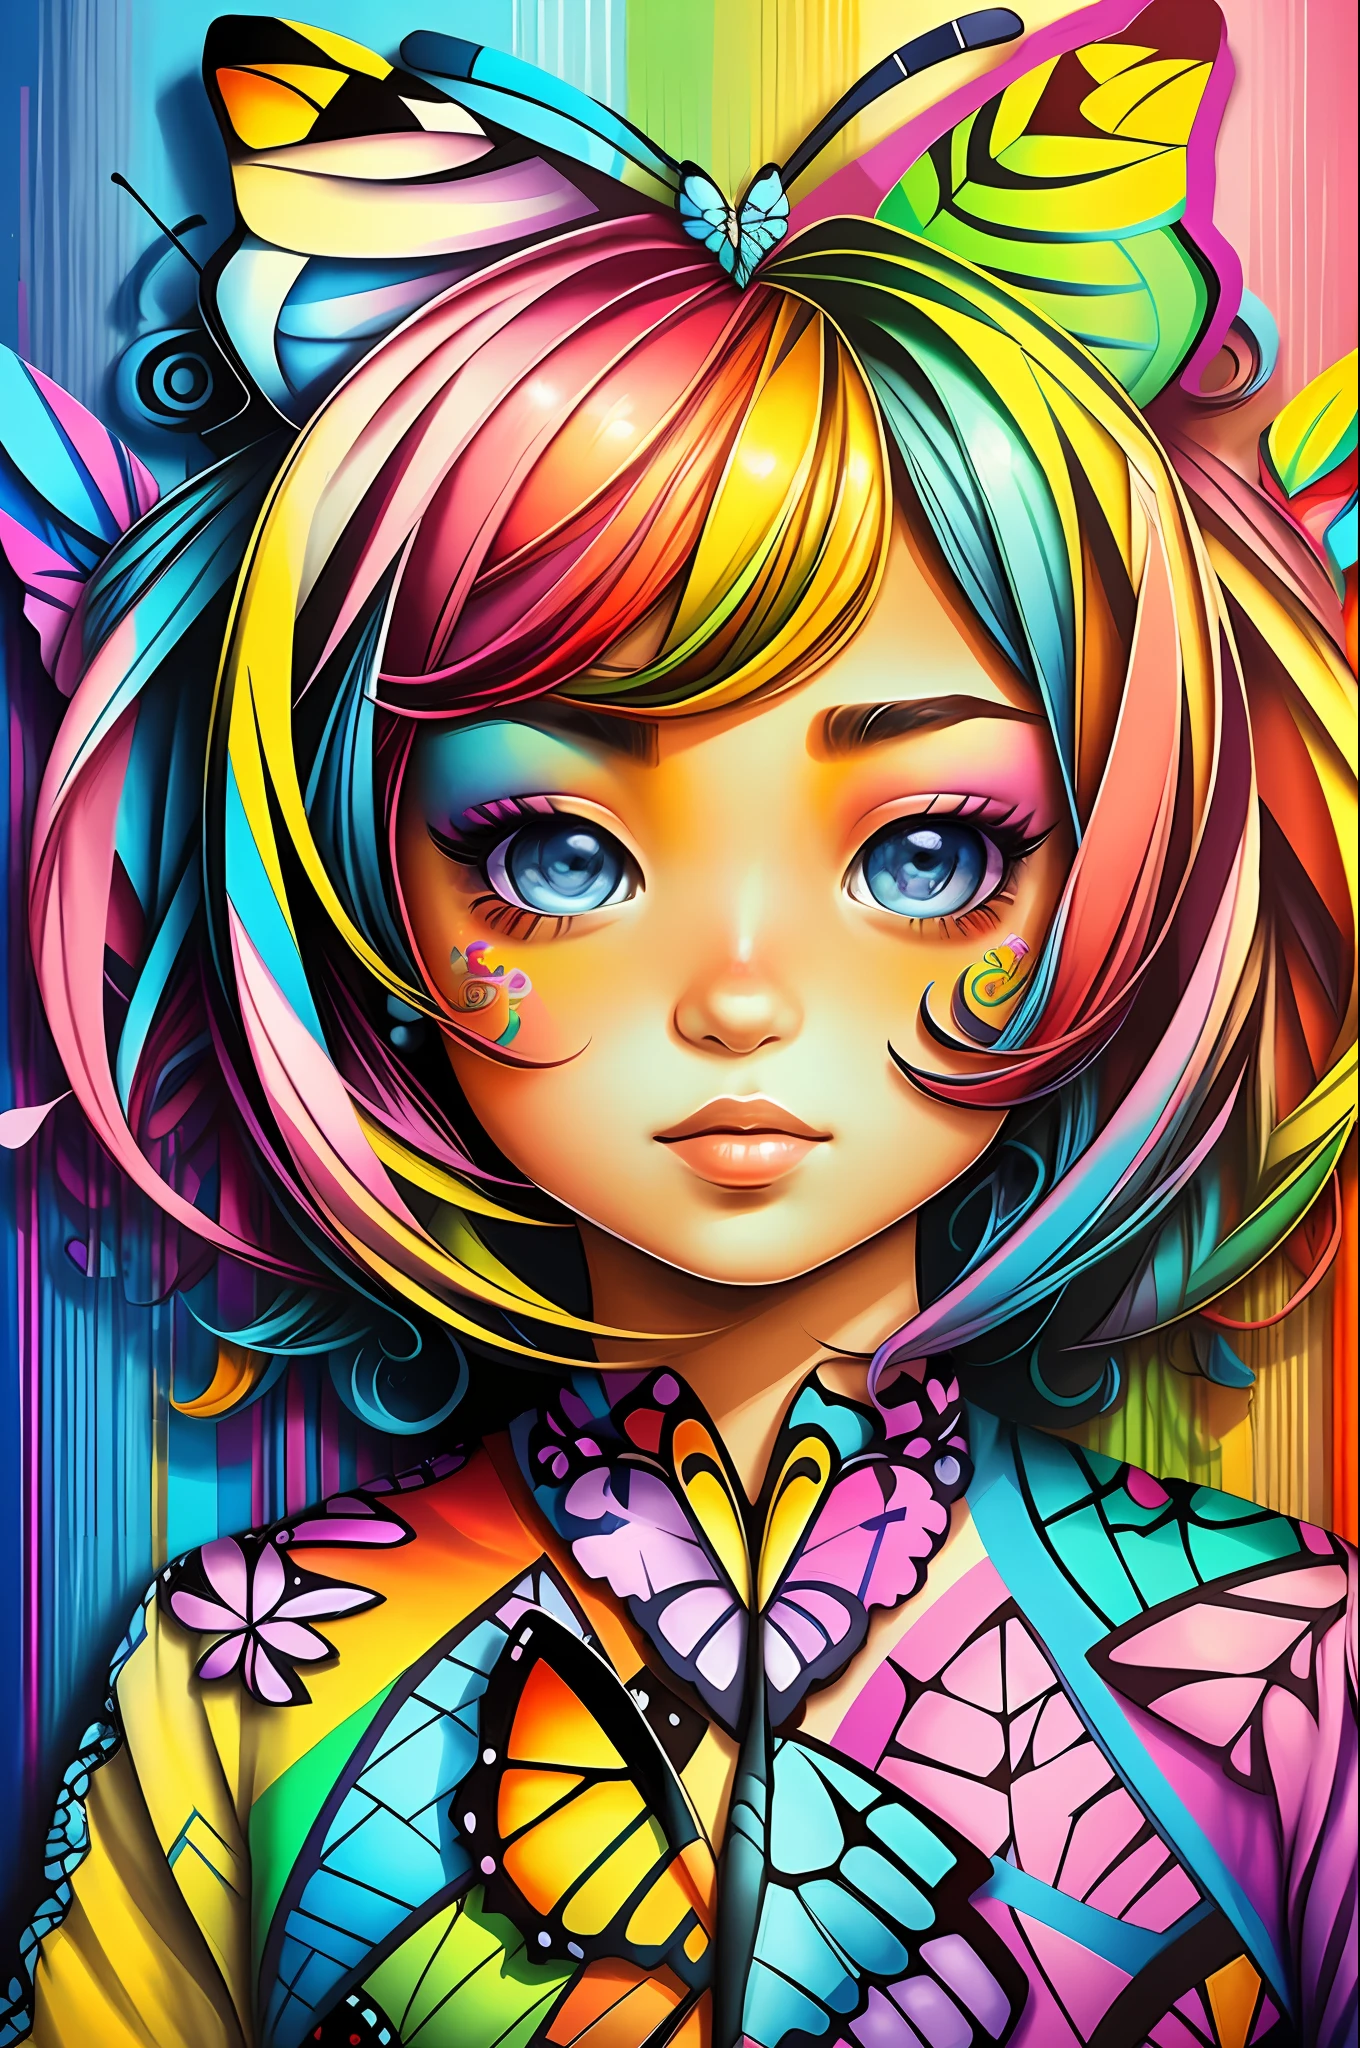 (Butterfly), Eduardo Kobra padding ,wall PORTRAIT geometric multidimensional, art, chibi,
yang08k, beautiful, colorful,
masterpieces, top quality, best quality, official art, beautiful and aesthetic,